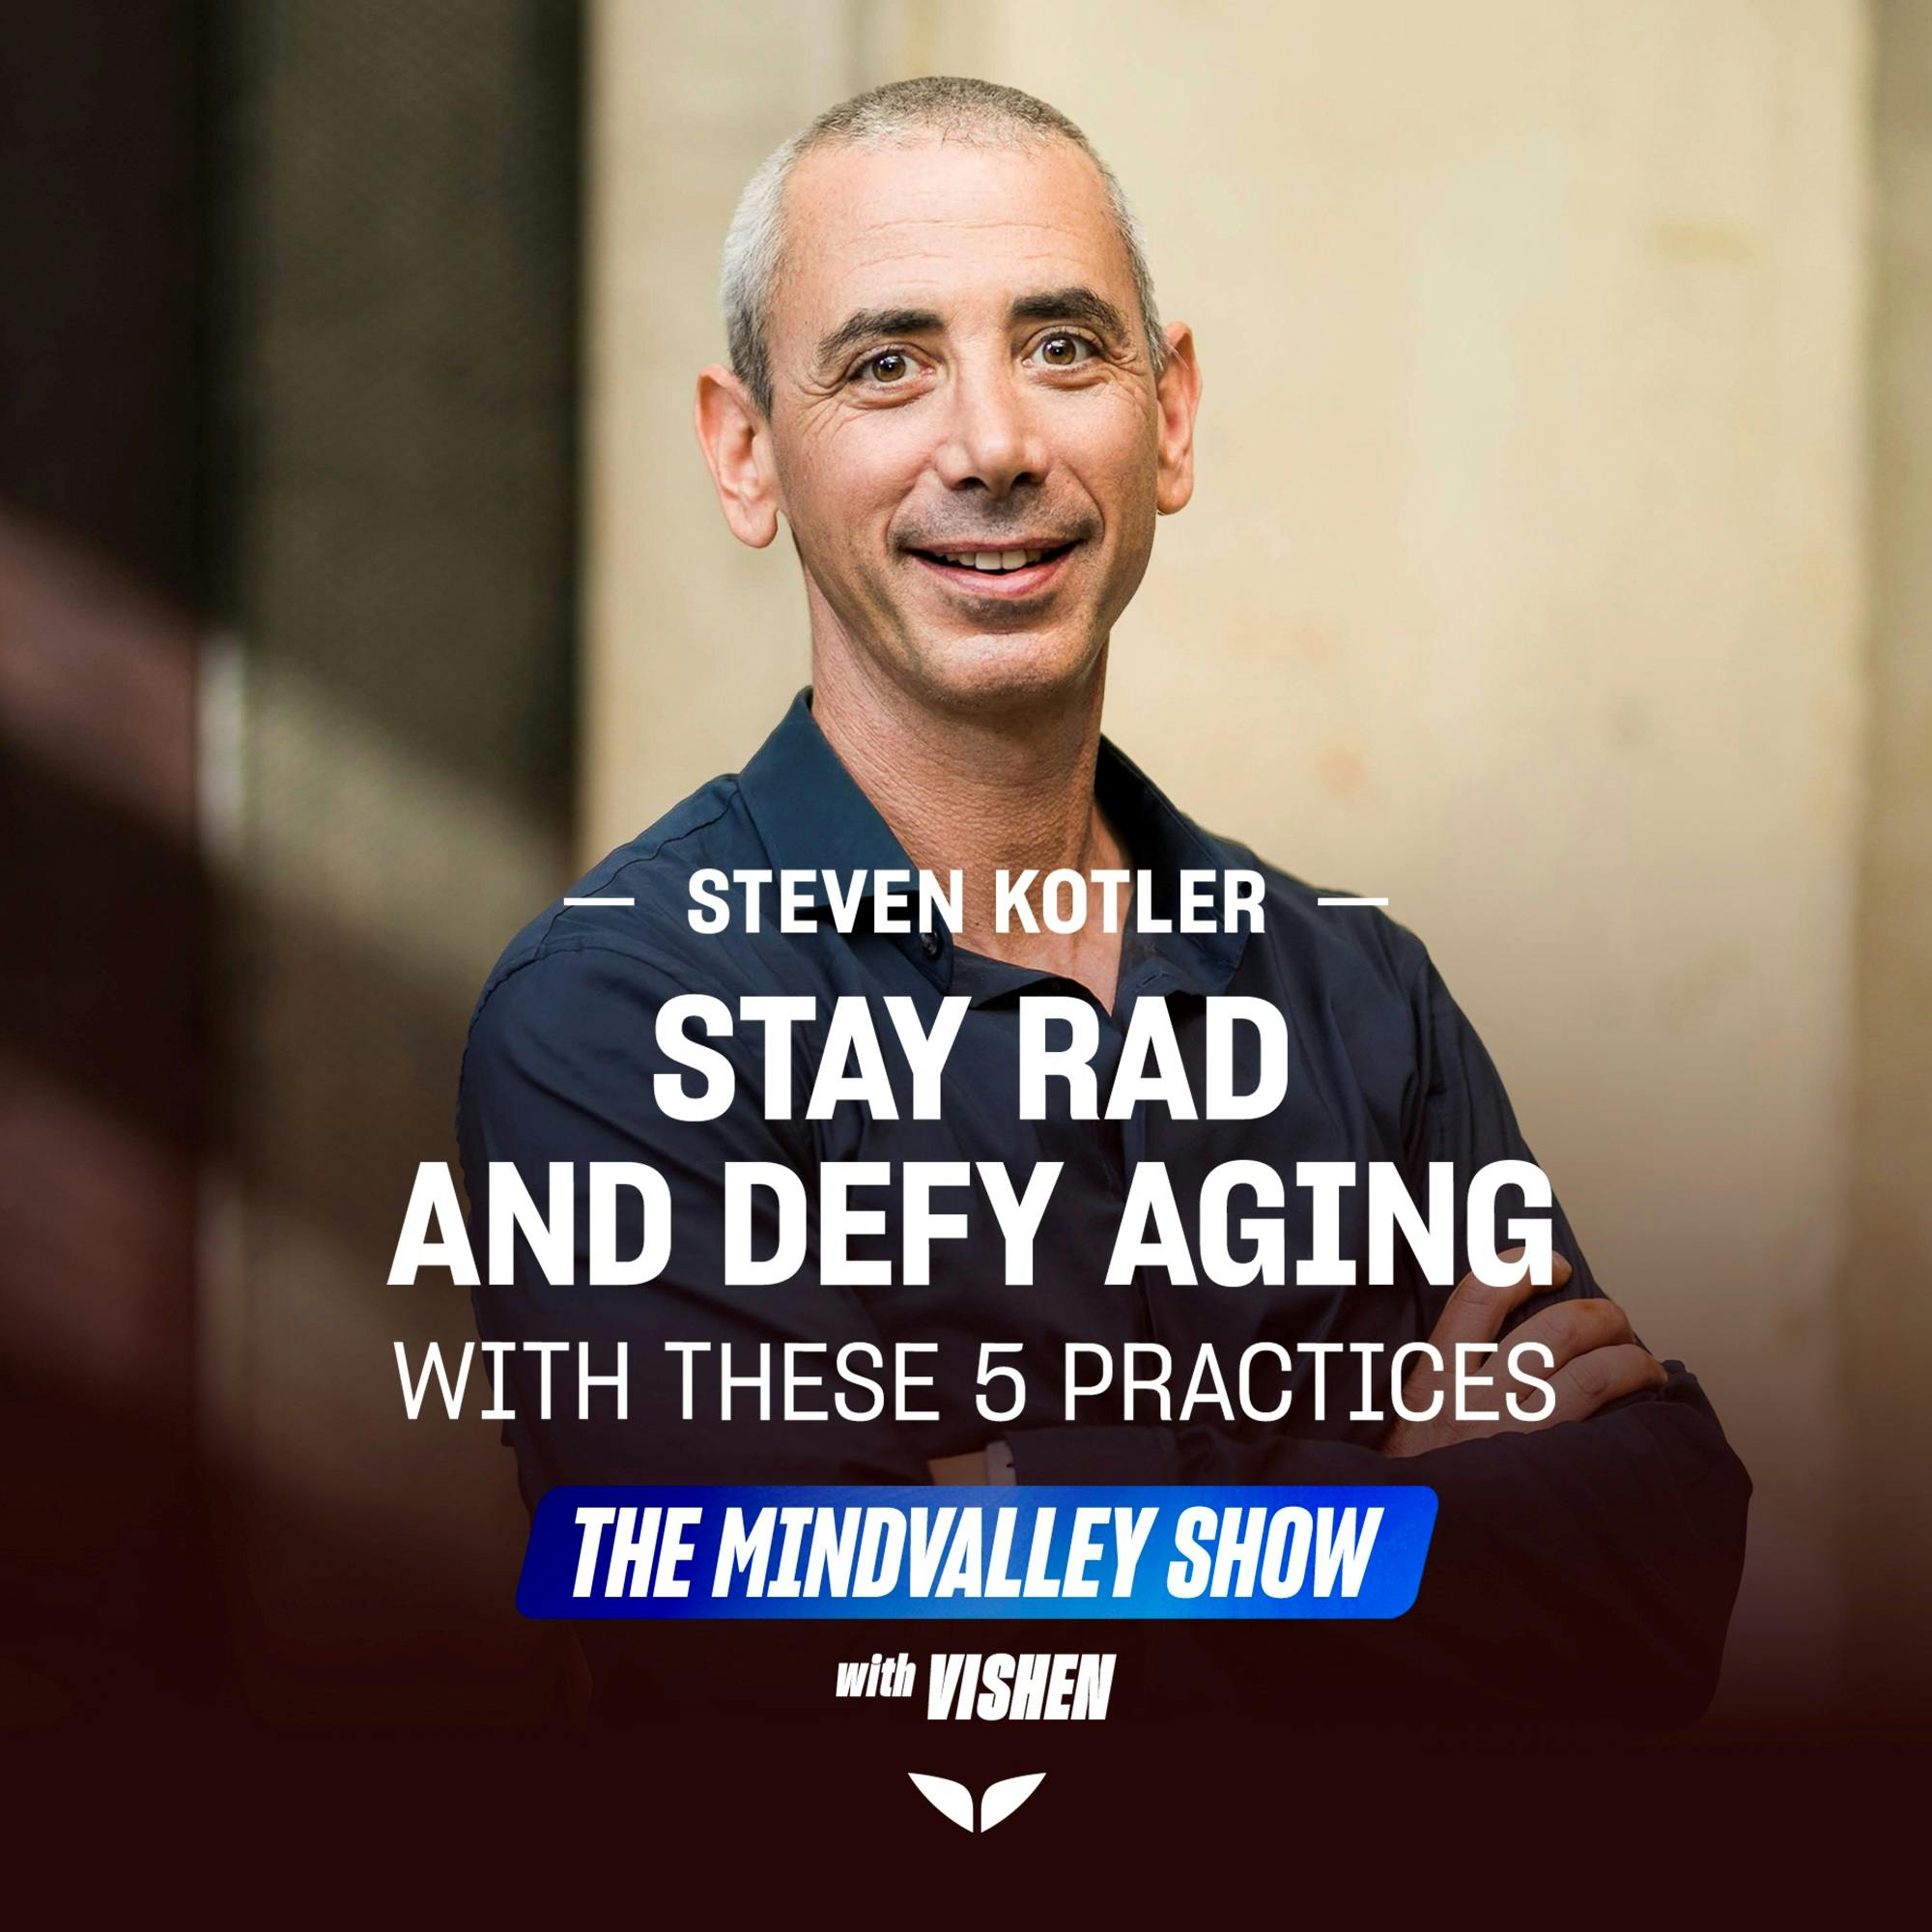 Stay Rad and Defy Aging with These 5 Practices from Steven Kotler